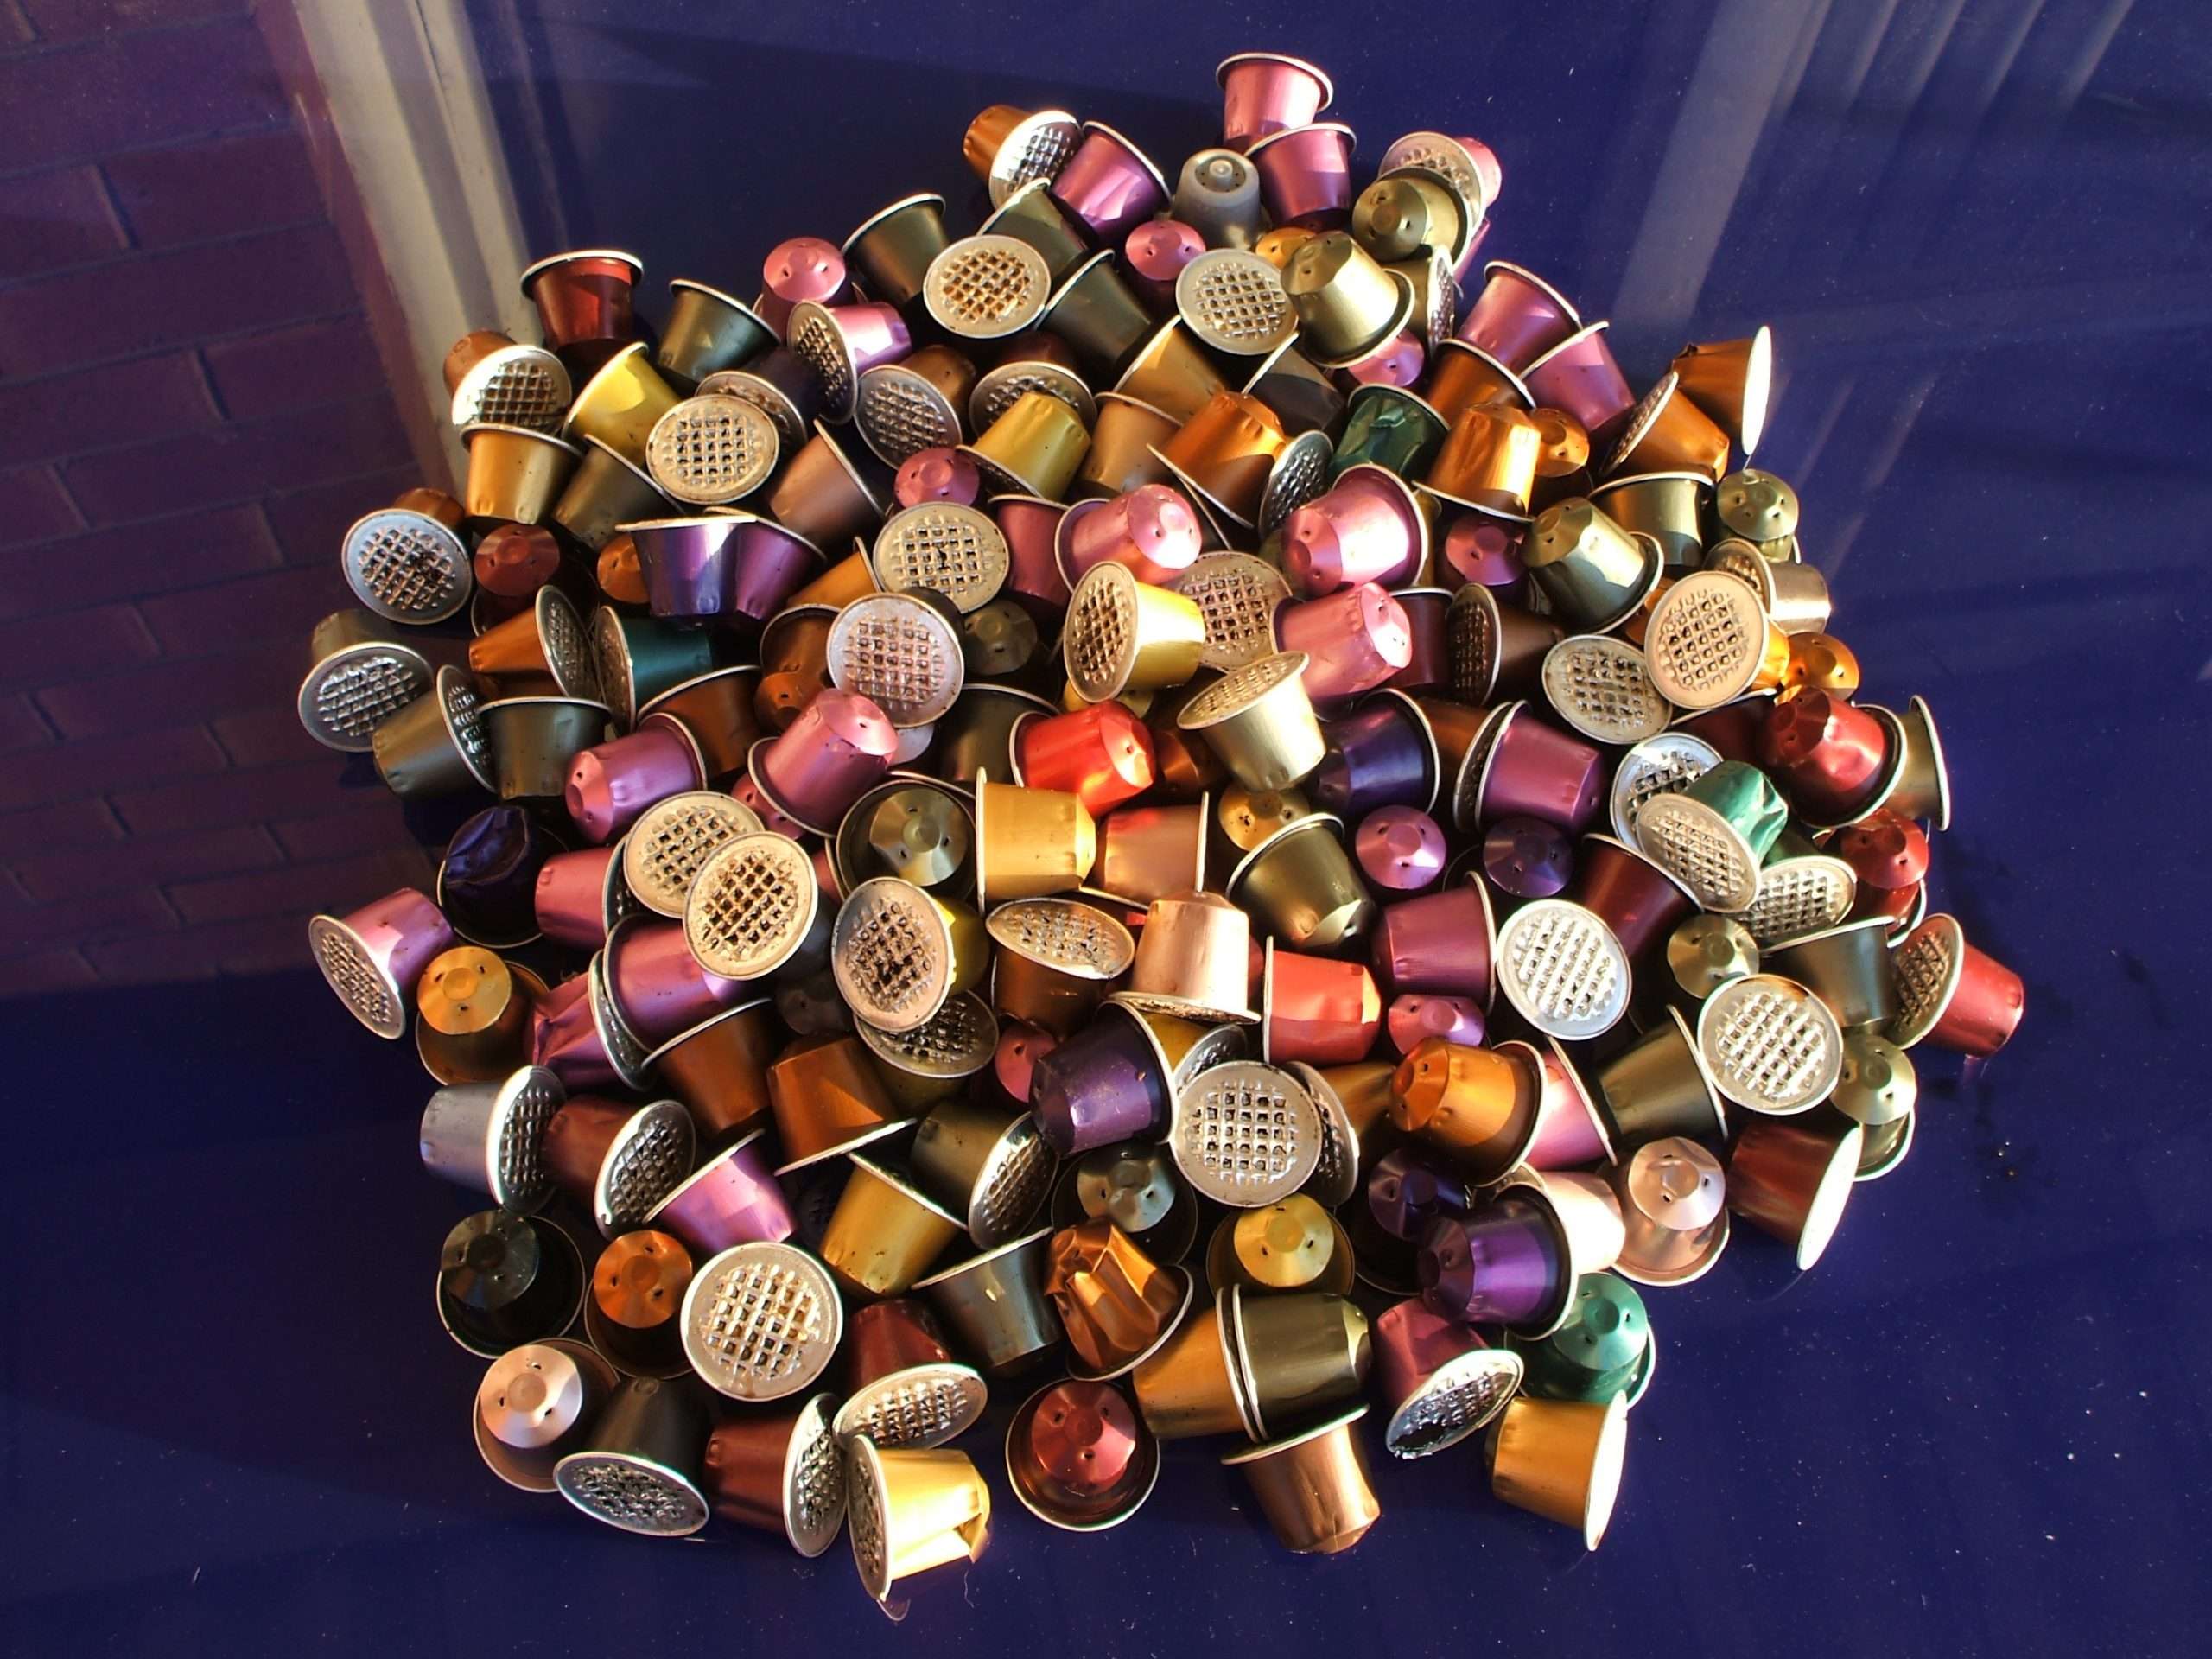 Crafty Ways to Recycle Your Coffee Pods at Home